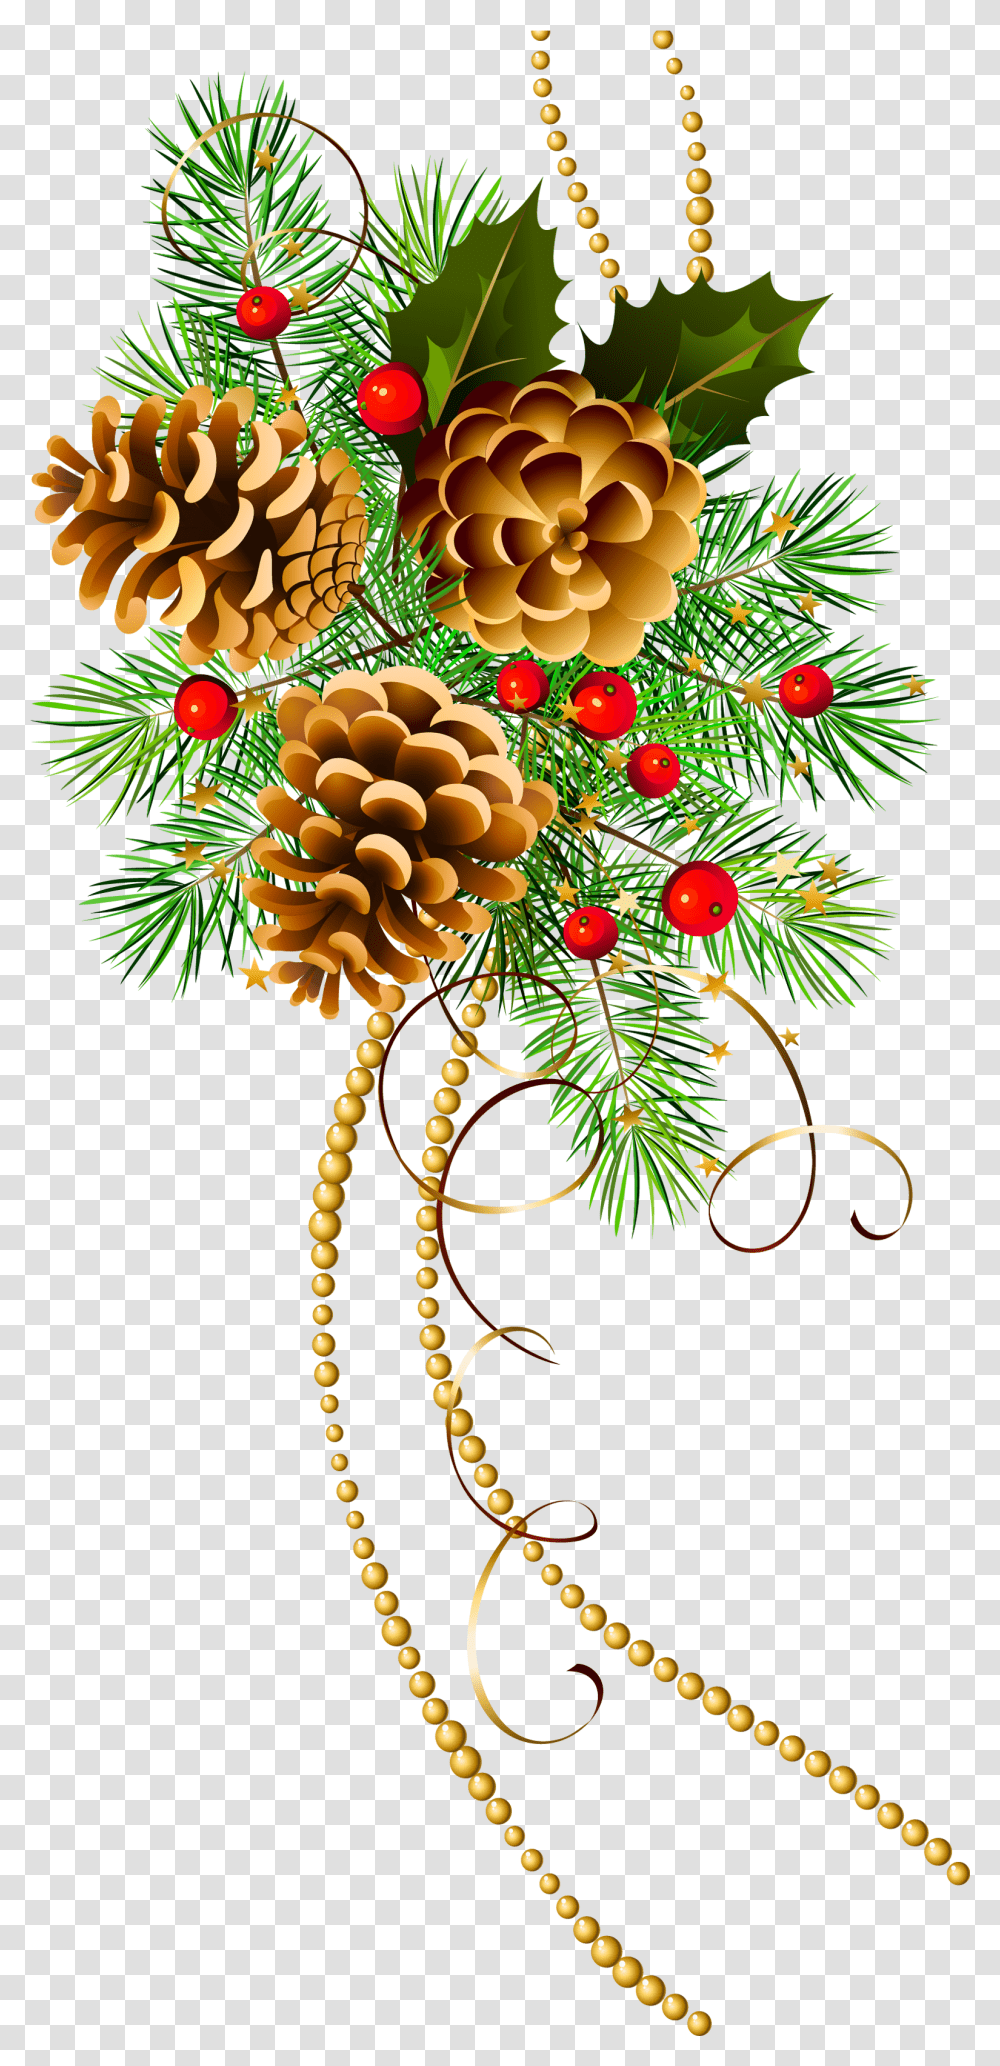 Pine And Cones Christmas Clip Art Large Branch, Ornament, Tree, Plant, Pattern Transparent Png